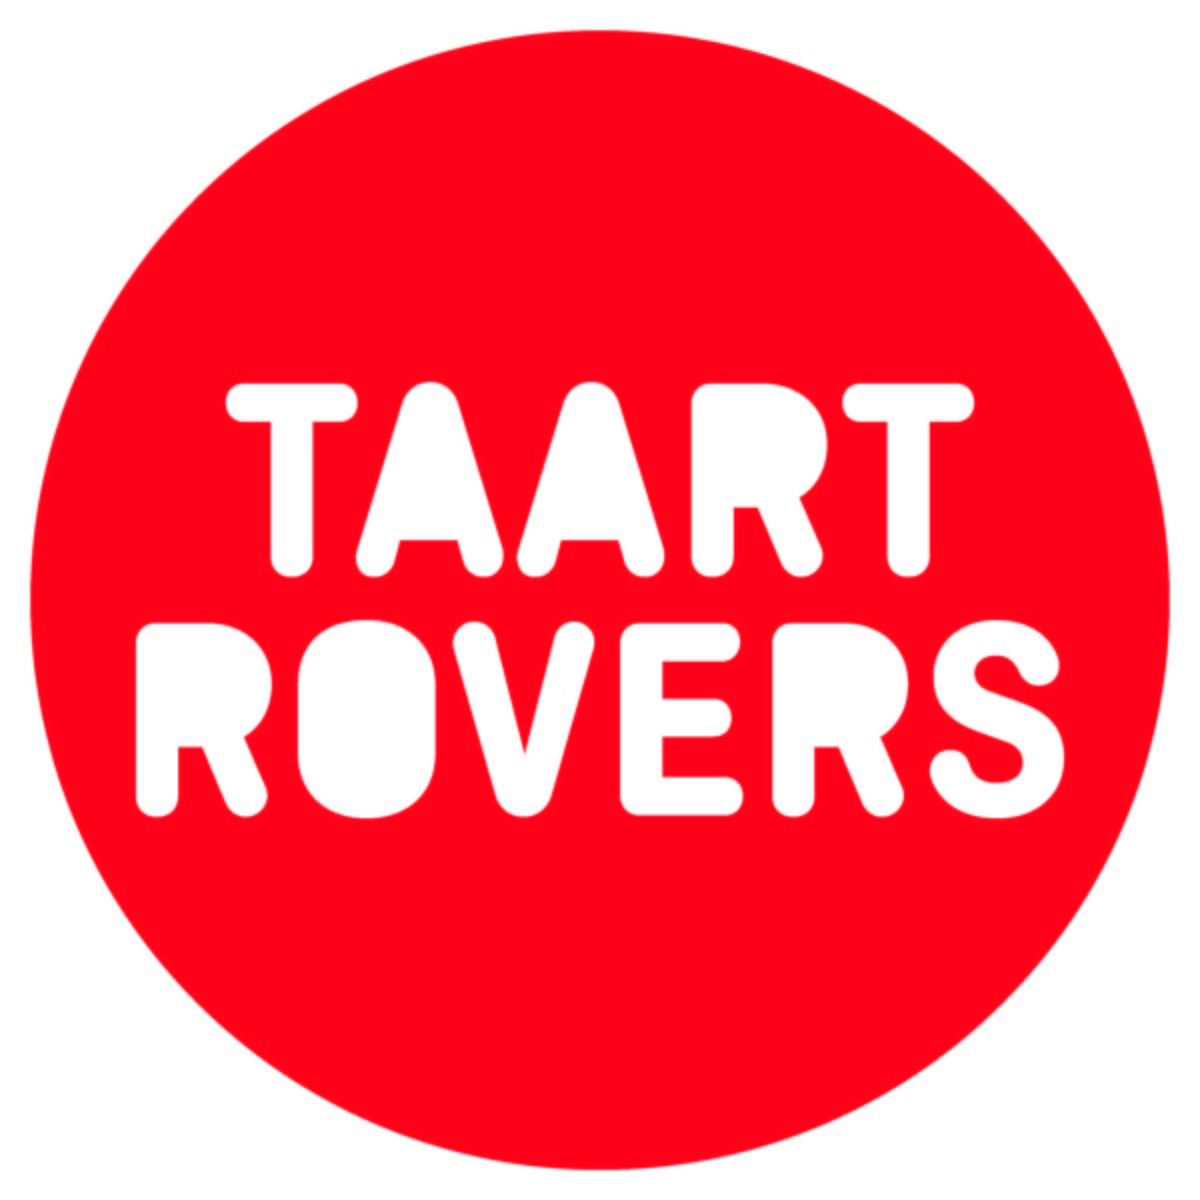 Taartrovers